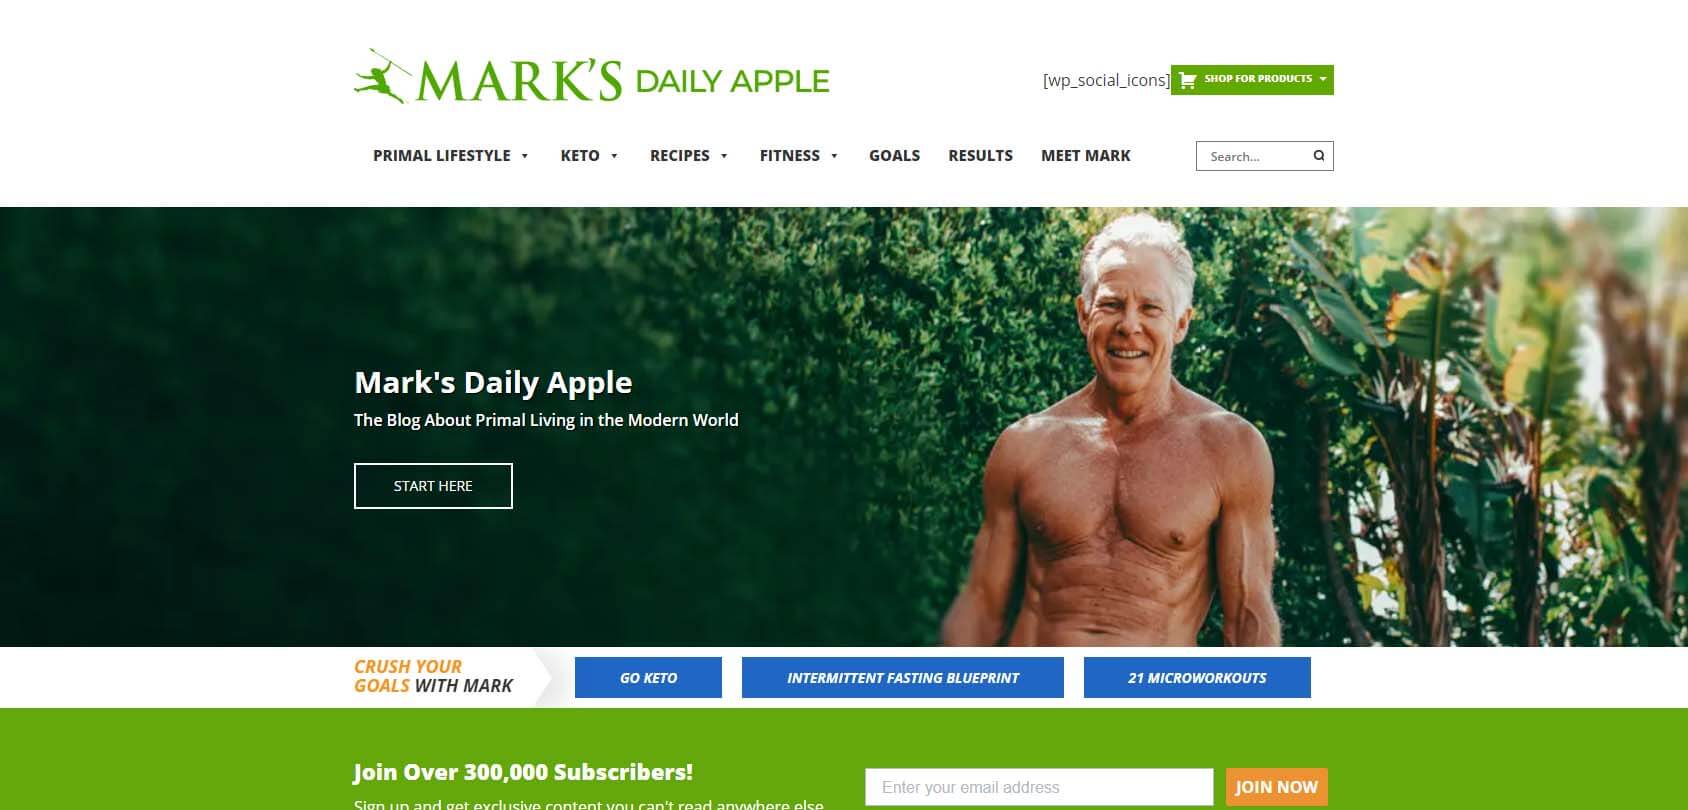 Mark’s Daily Apple Homepage